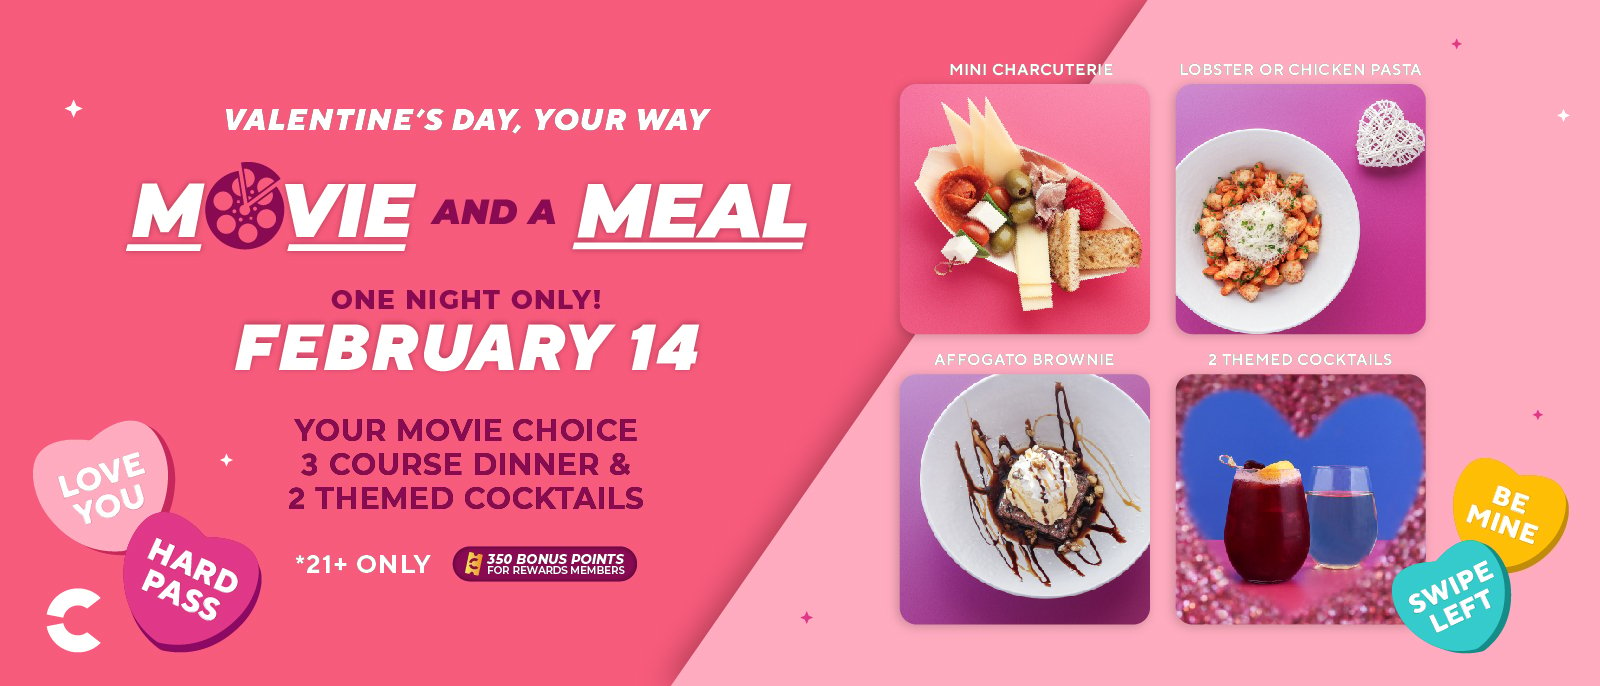 Valentine's Day at the movies event